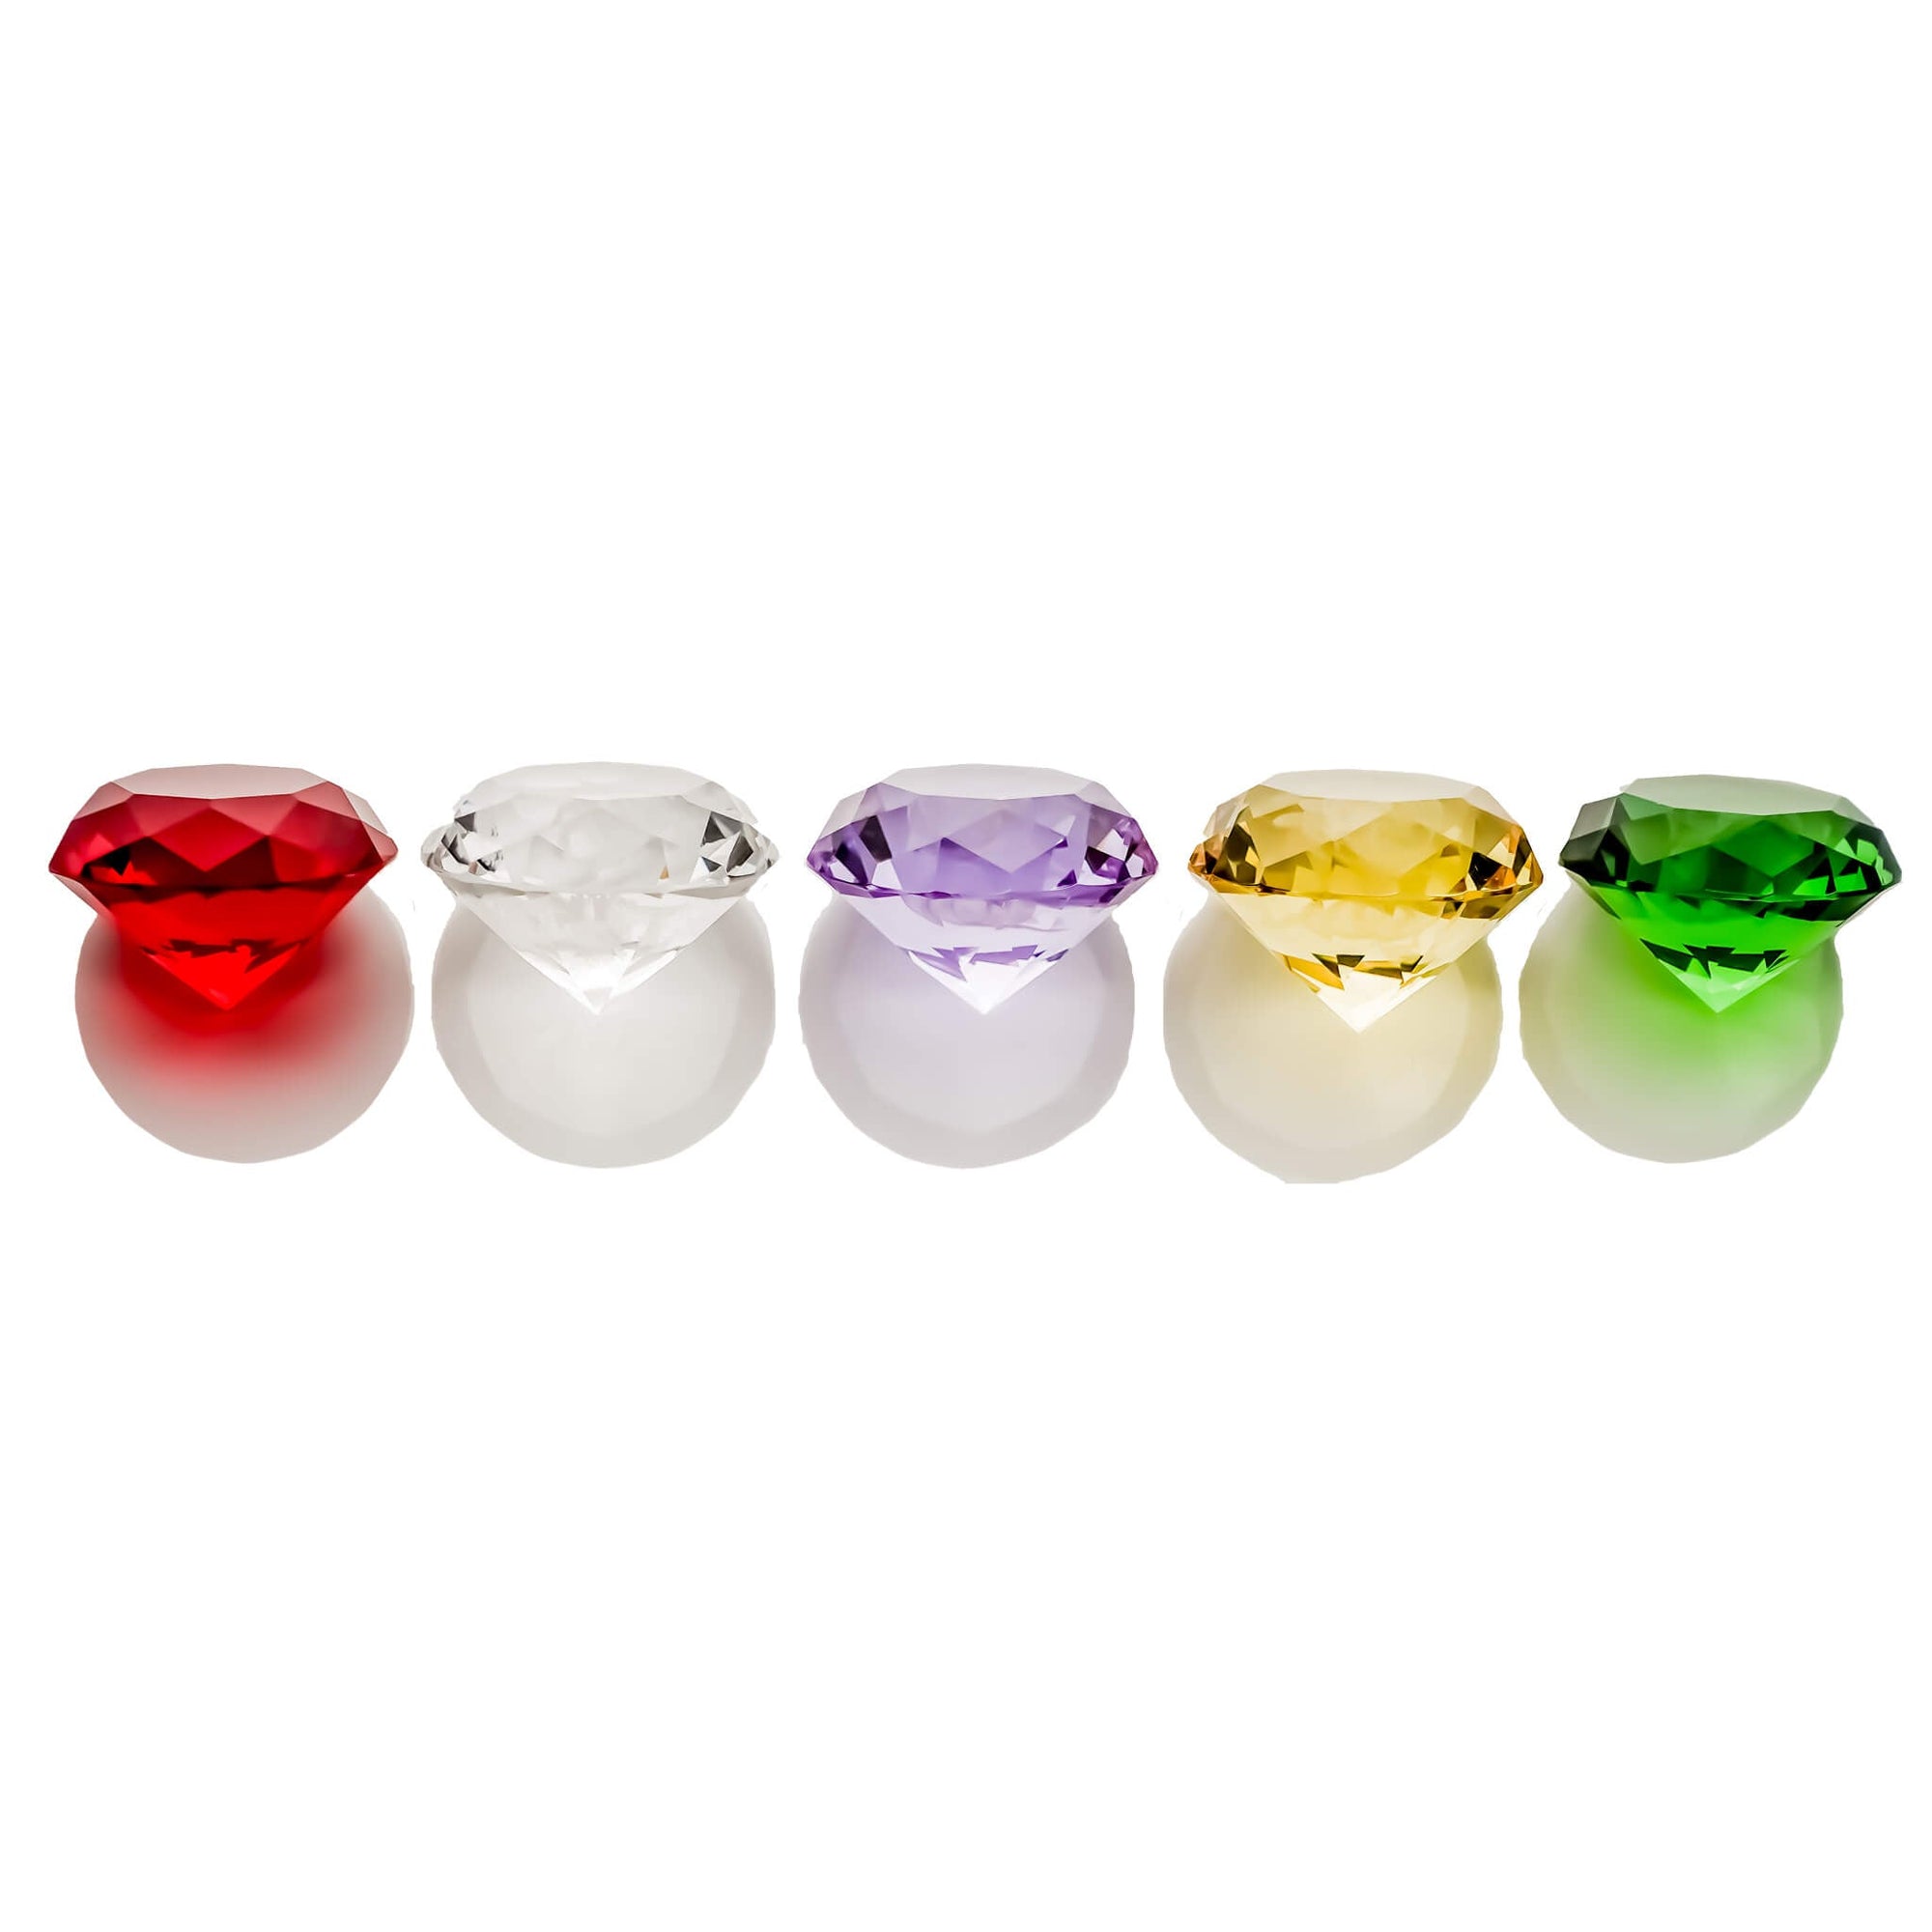 Diamond Cut Carb Cap | All Five Color Variations View | Dabbing Warehouse